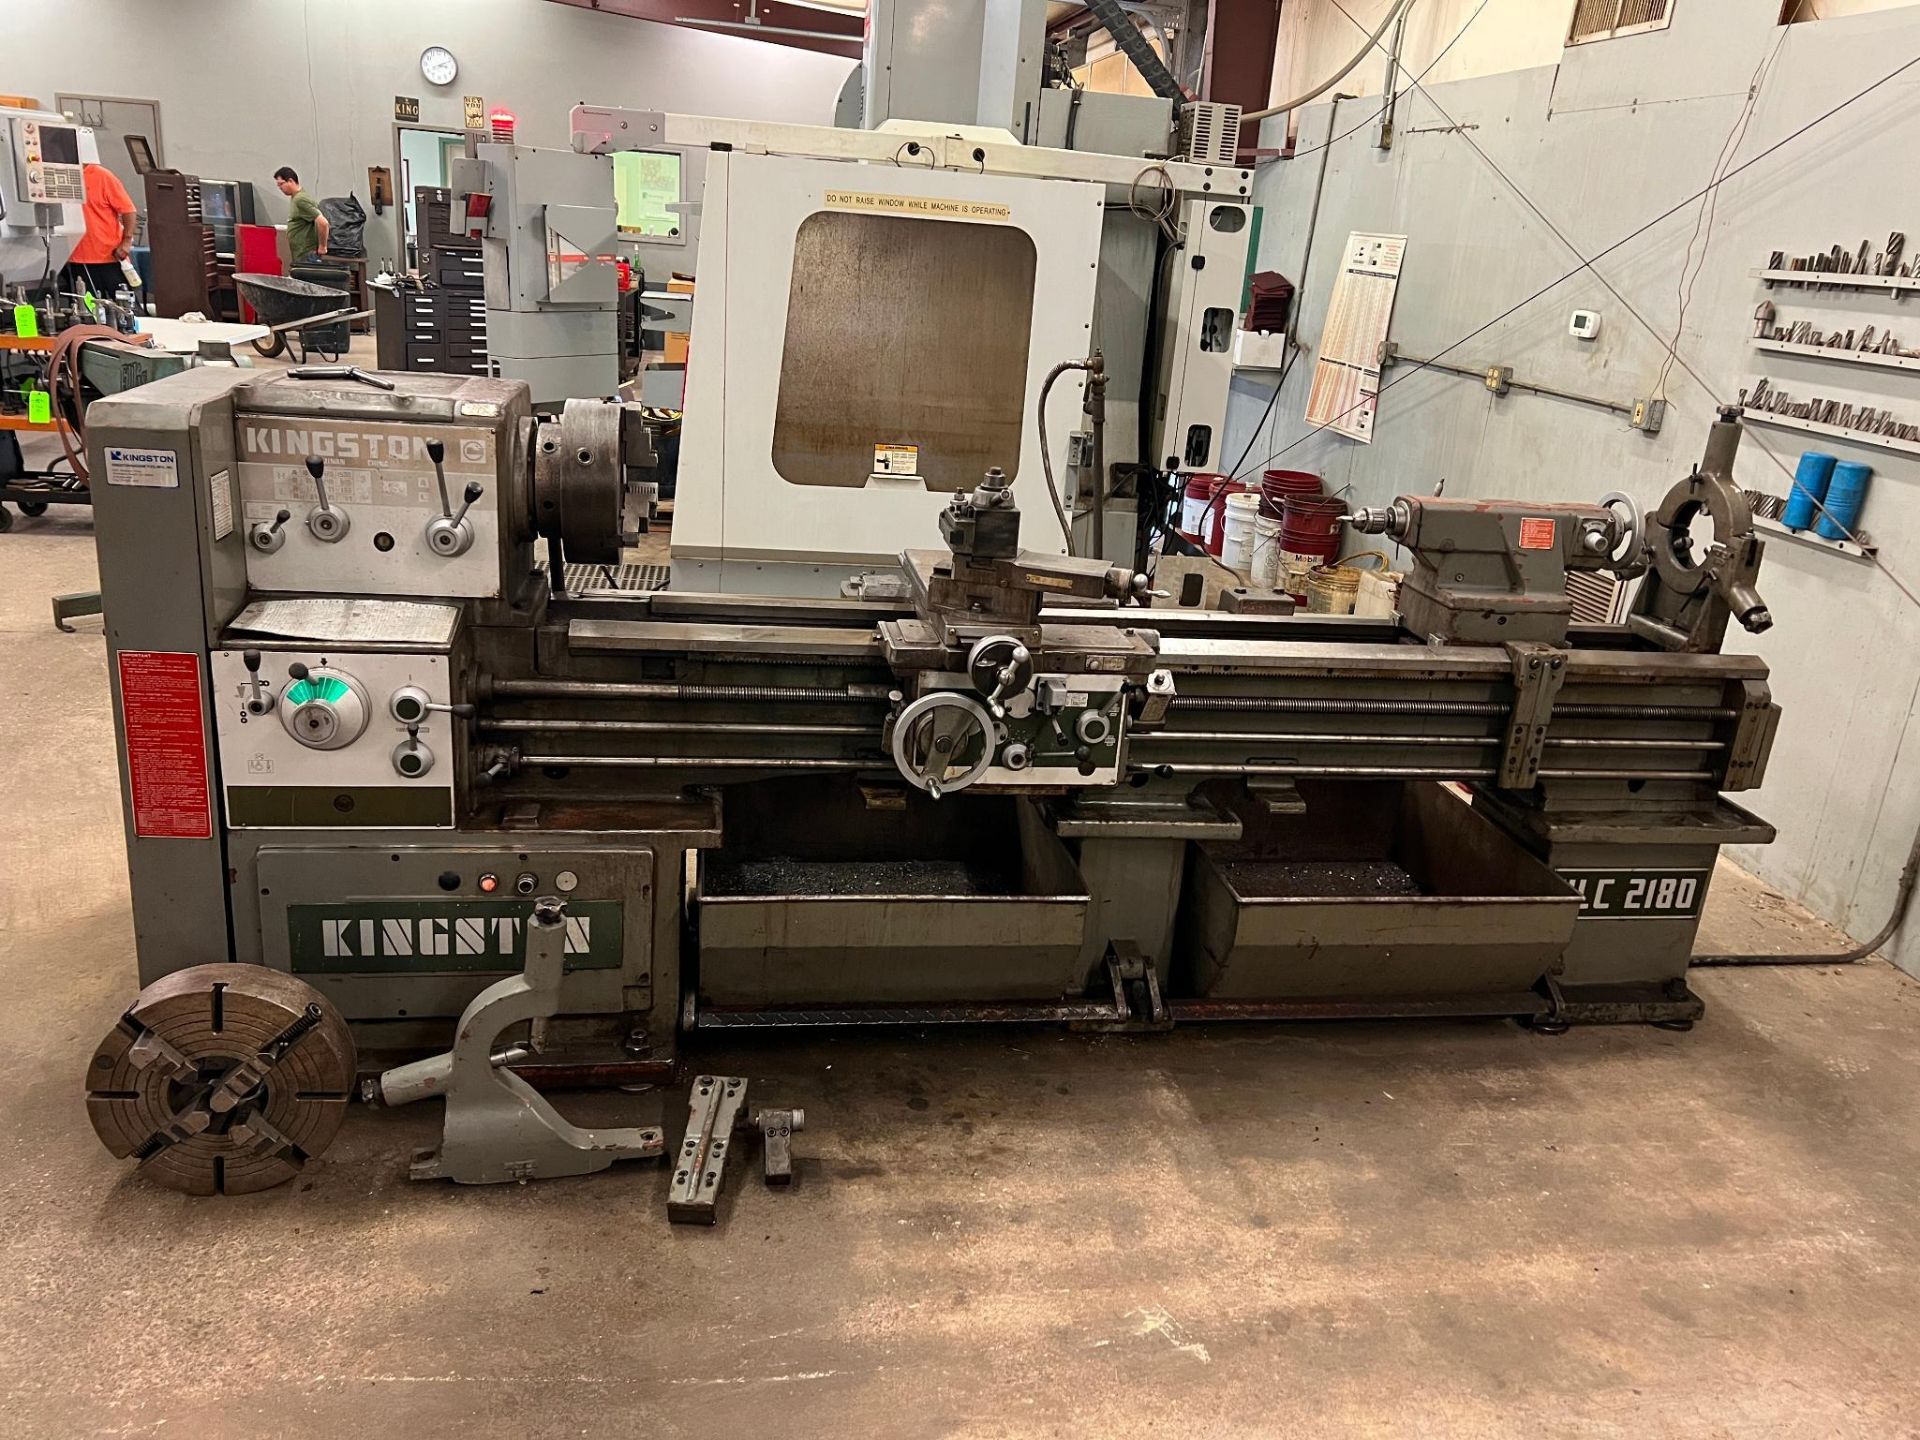 Kingston HLC-2180 (JIMK530x2000) Gap Bed Engine lathe Serial Number K3099715. 21" x 80" Swing over b - Image 2 of 21